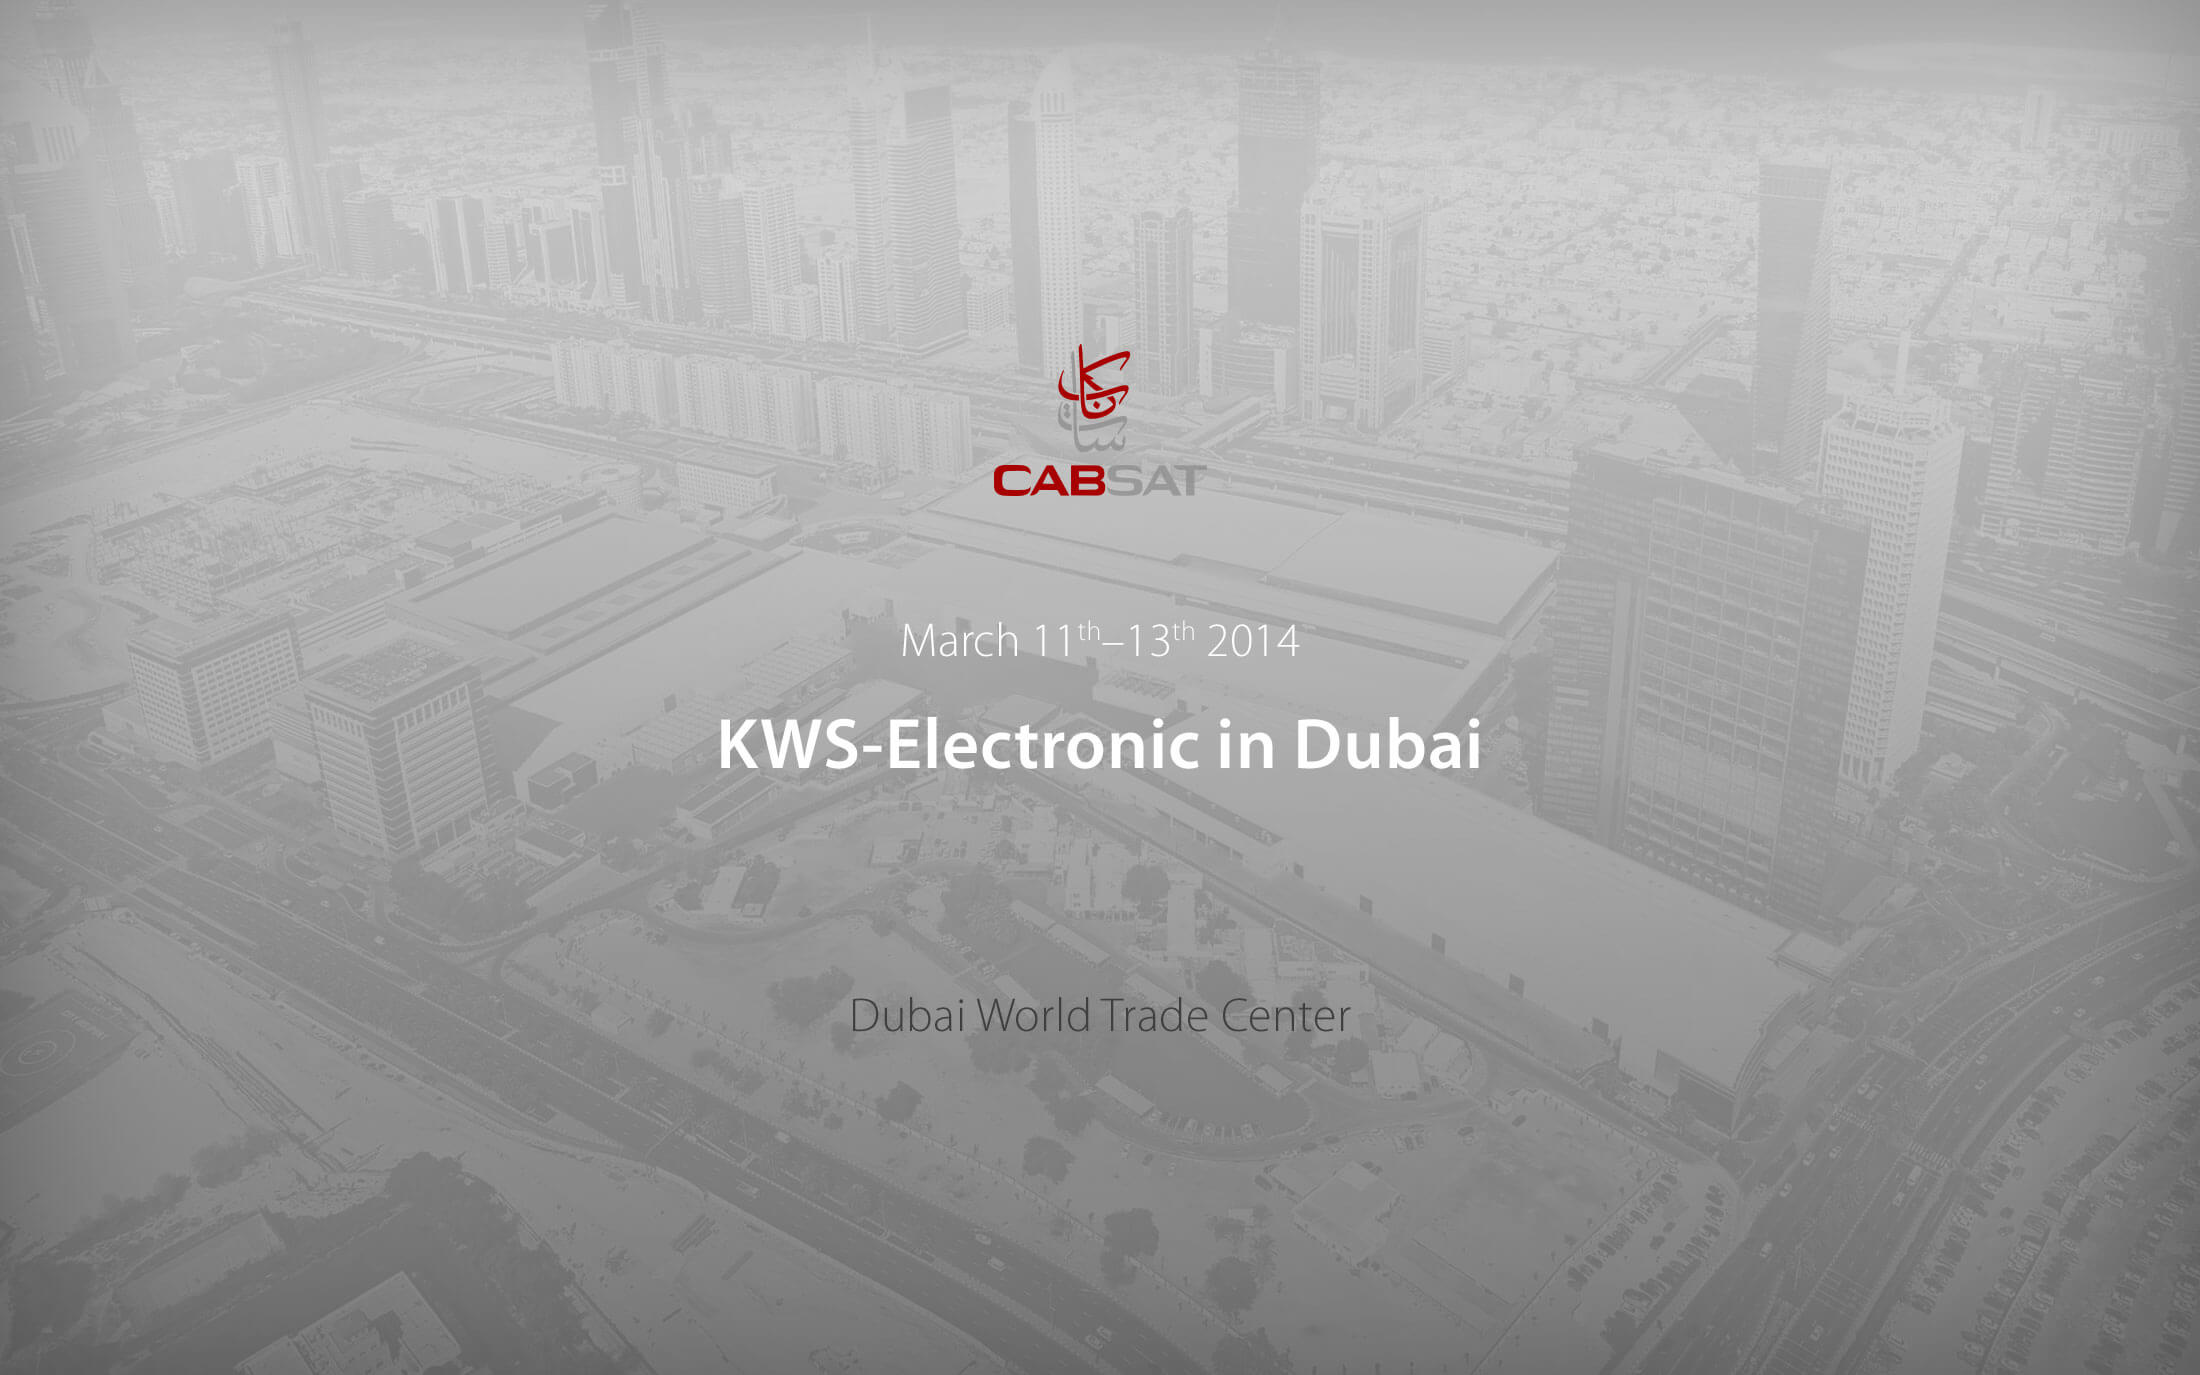 KWS-Electronic at CABSAT 2014 in Dubai